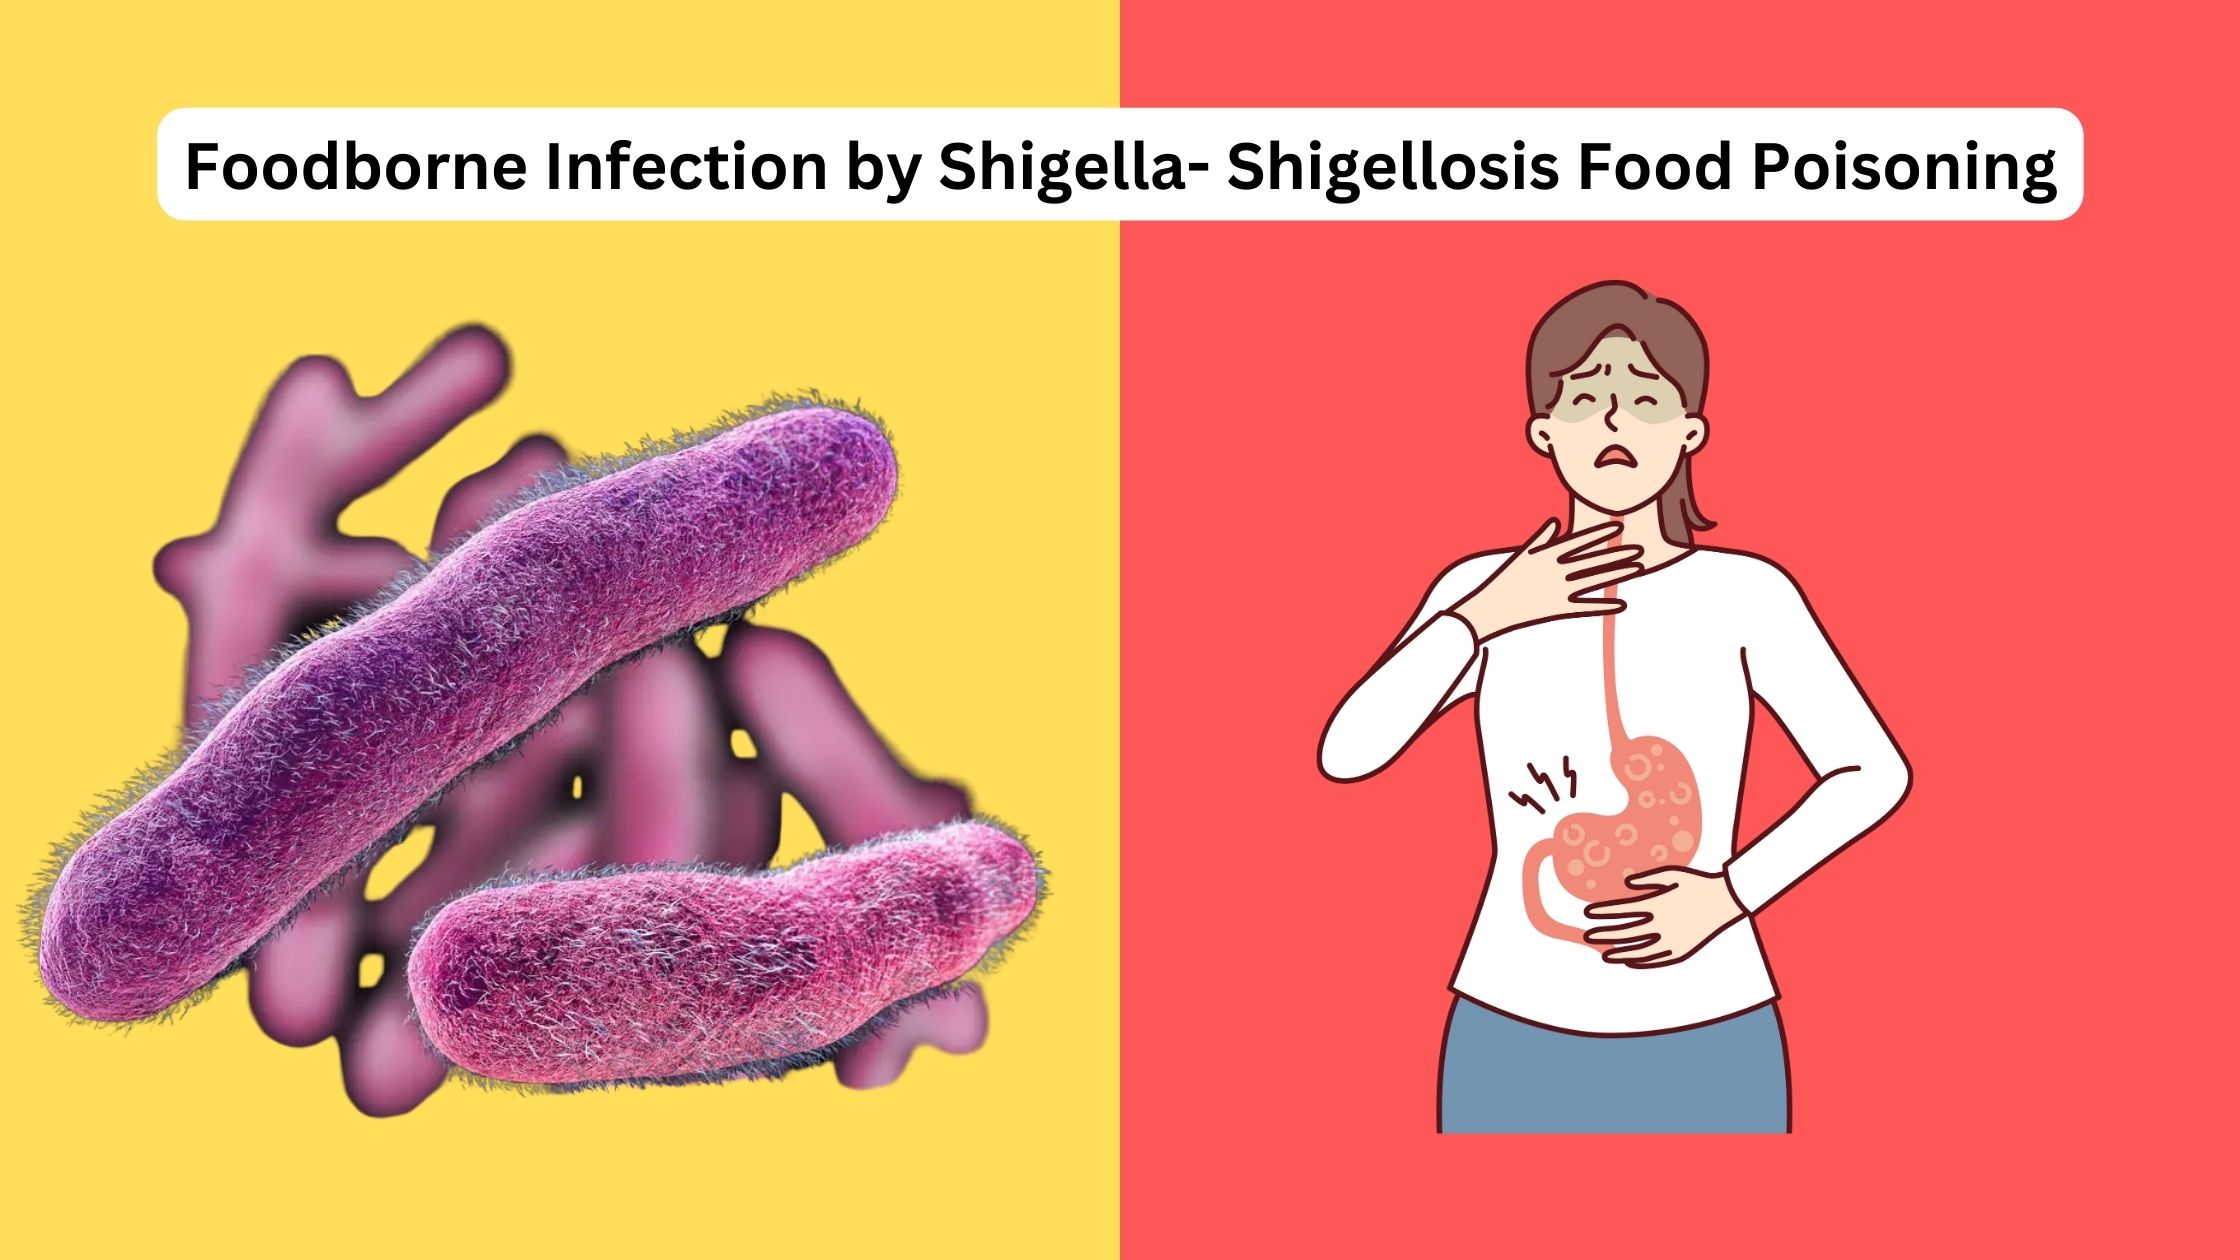 Foodborne Infection by Shigella- Shigellosis Food Poisoning